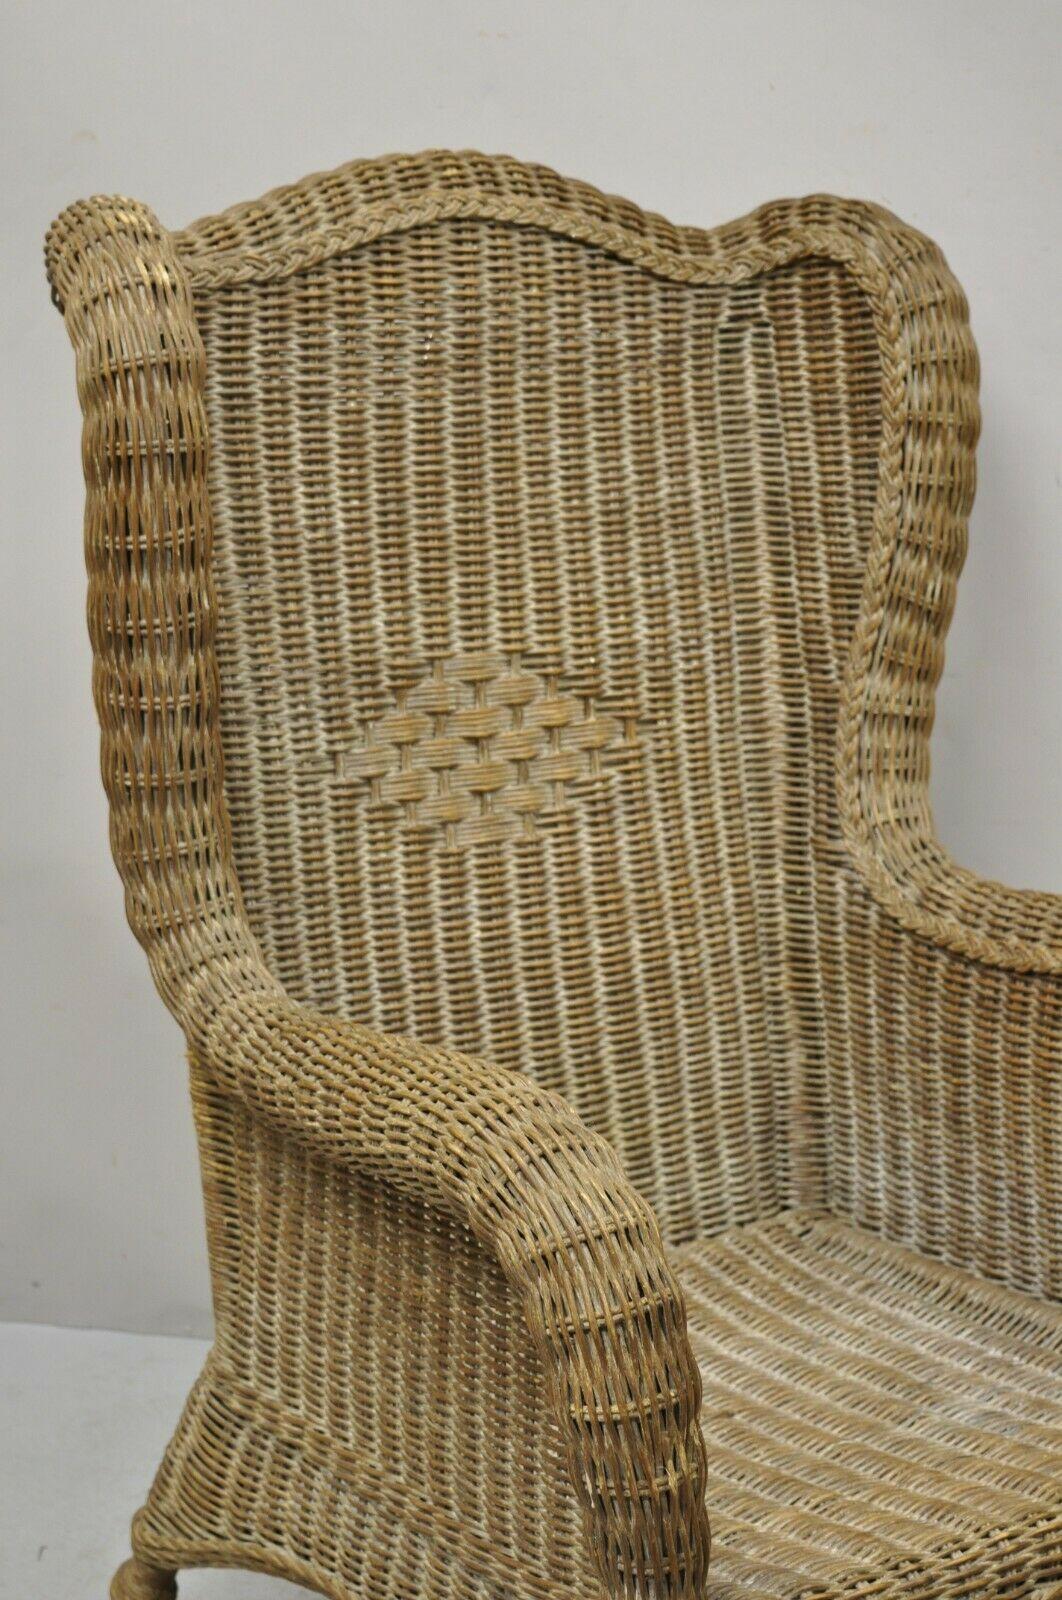 Large Woven Wicker Rattan Victorian Style Wingback Lounge Arm Chair In Good Condition For Sale In Philadelphia, PA